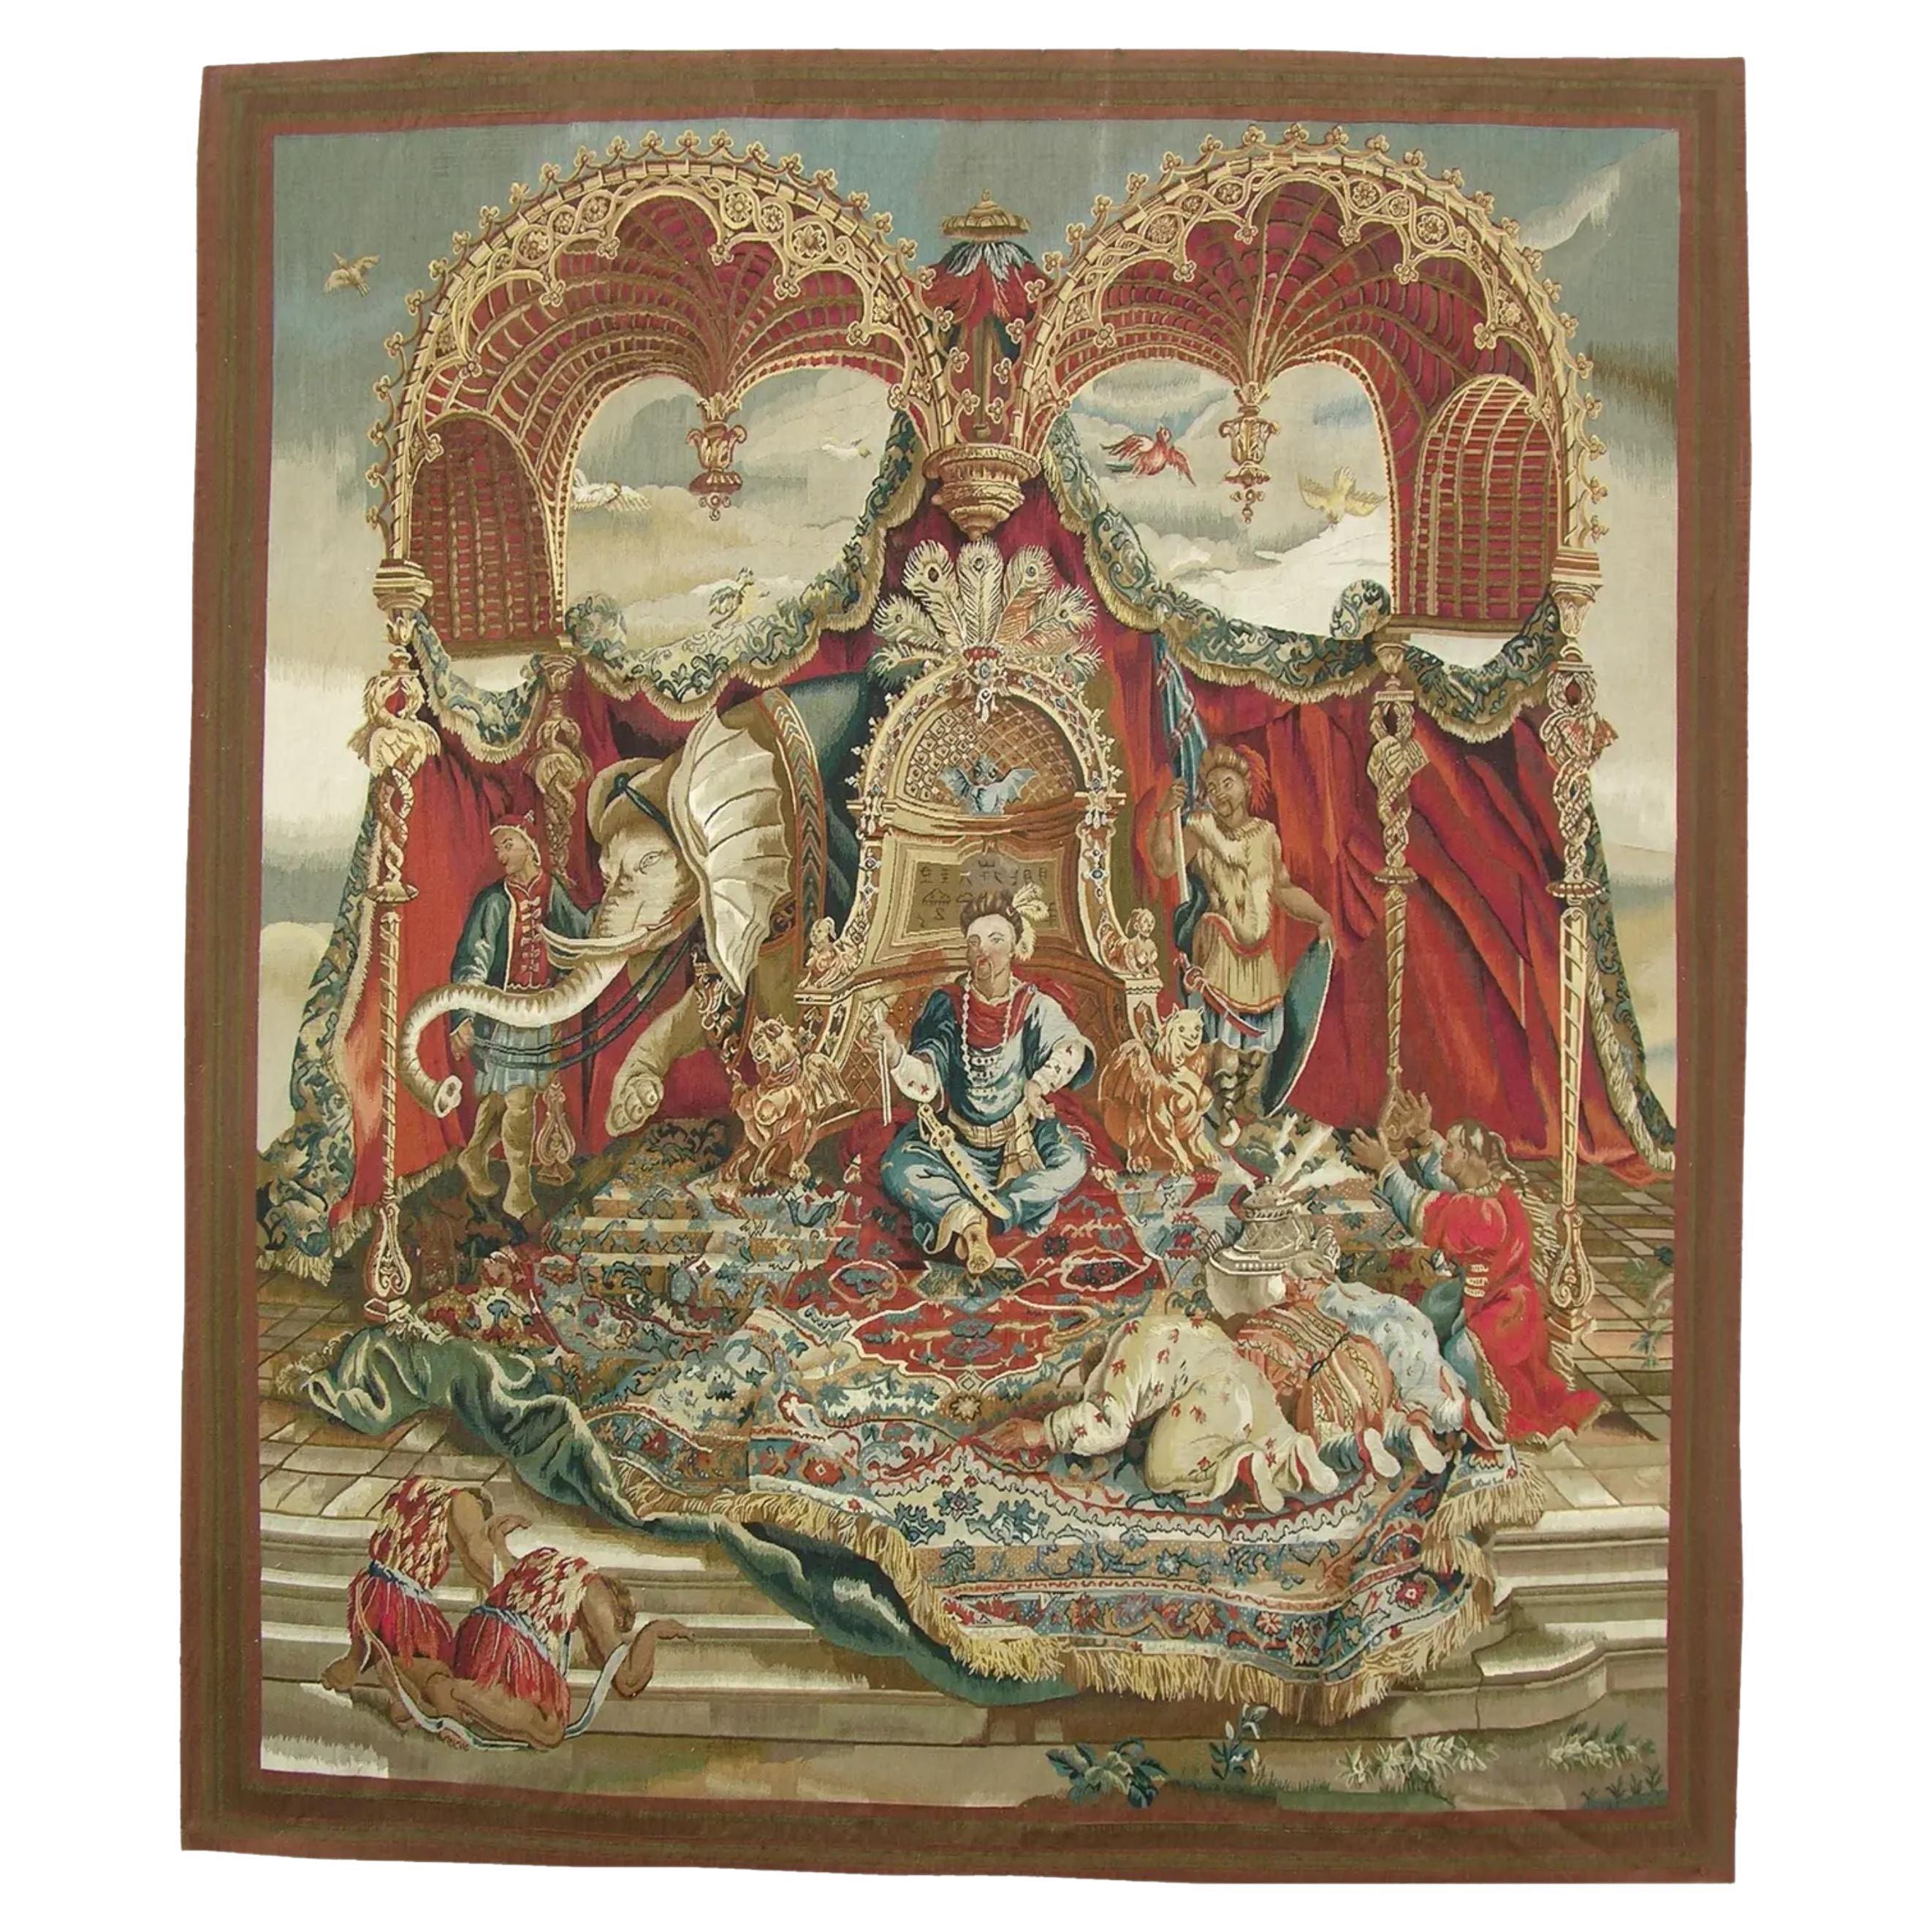 Vintage Woven Throne Scene Tapestry 7.9X6.9 For Sale